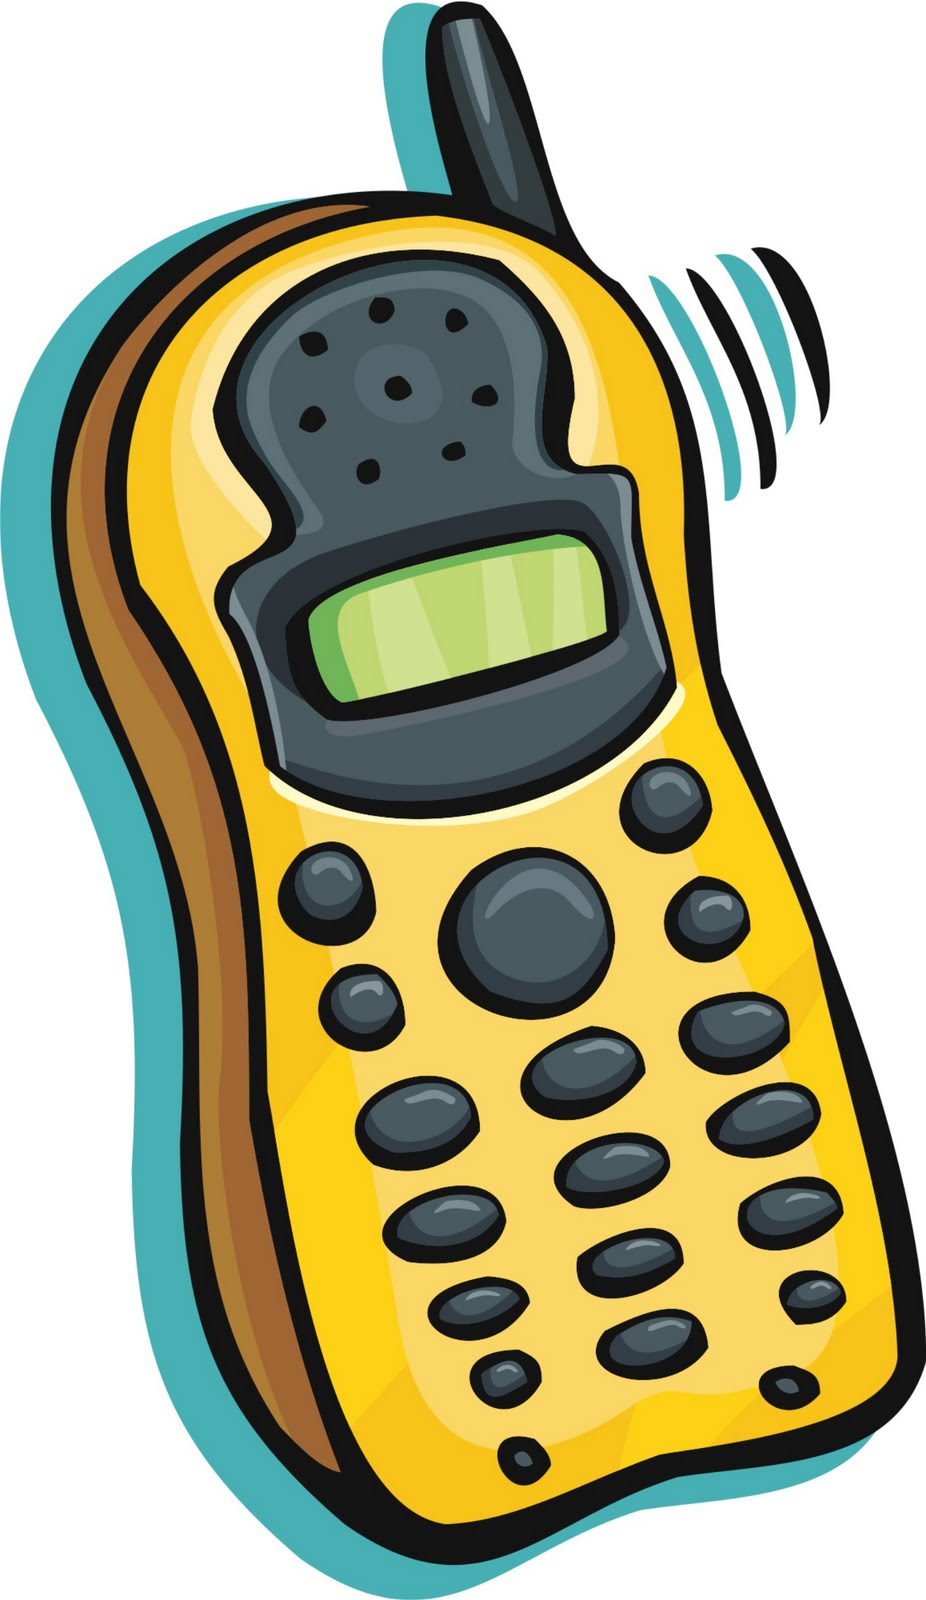 Phone clip art icon free clipart images